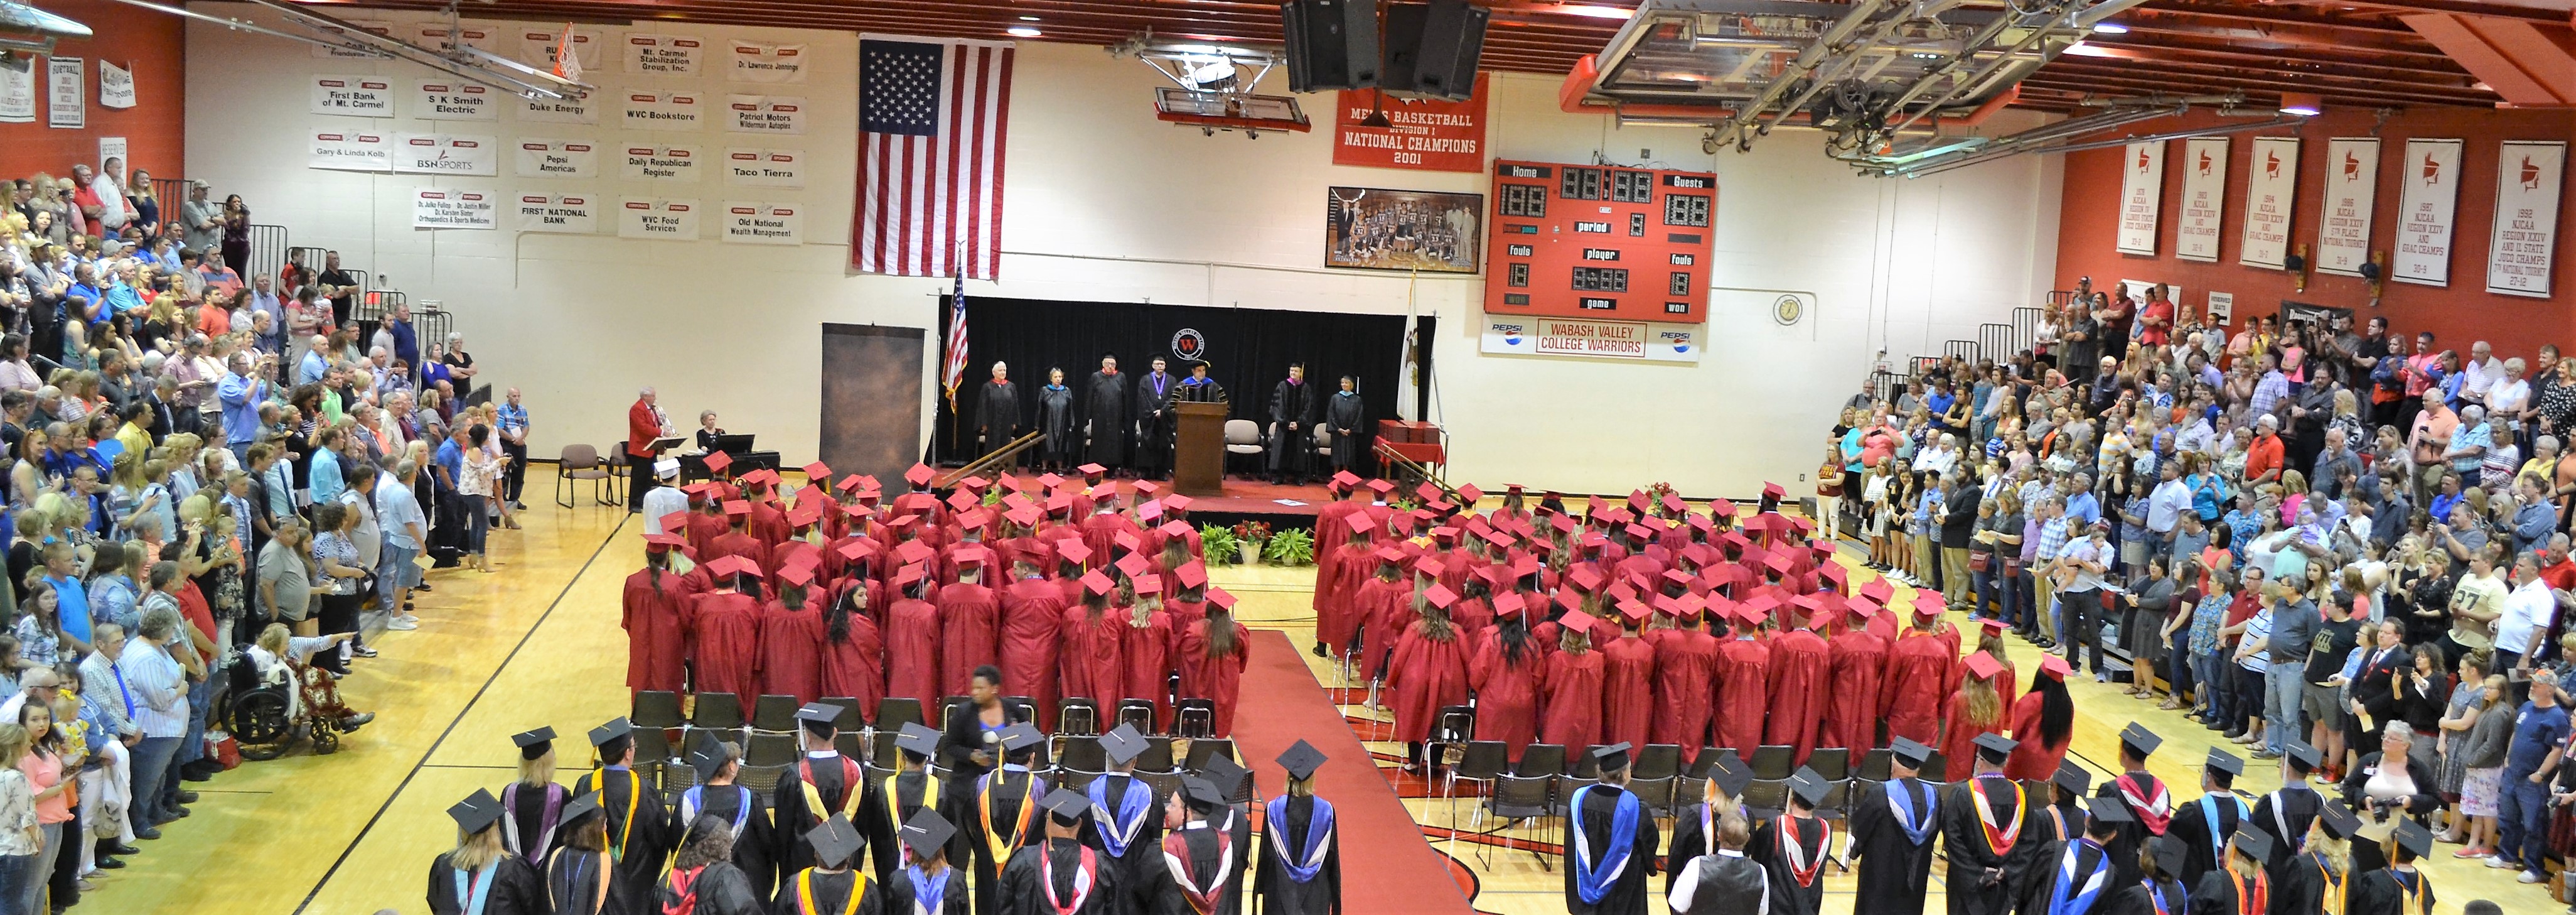 Photo of WVC Graduation in the Spencer Sports Center